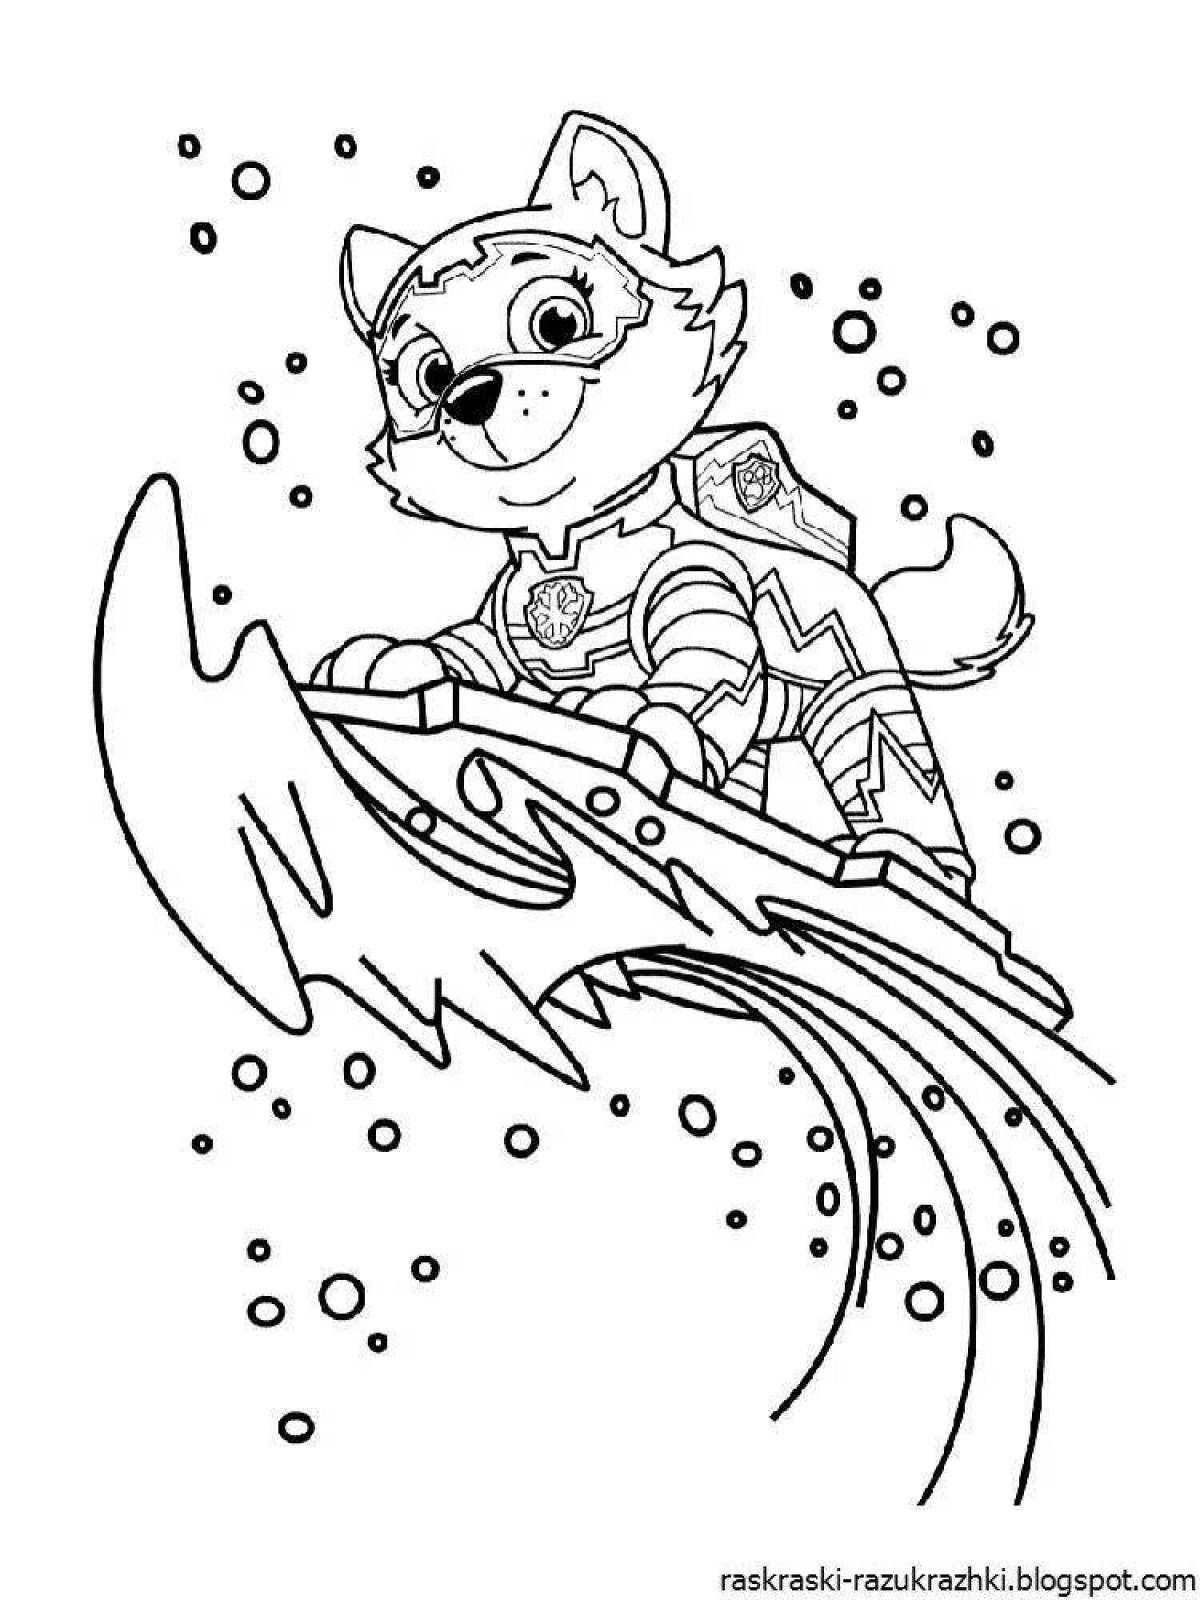 Snuggly coloring page mega puppies